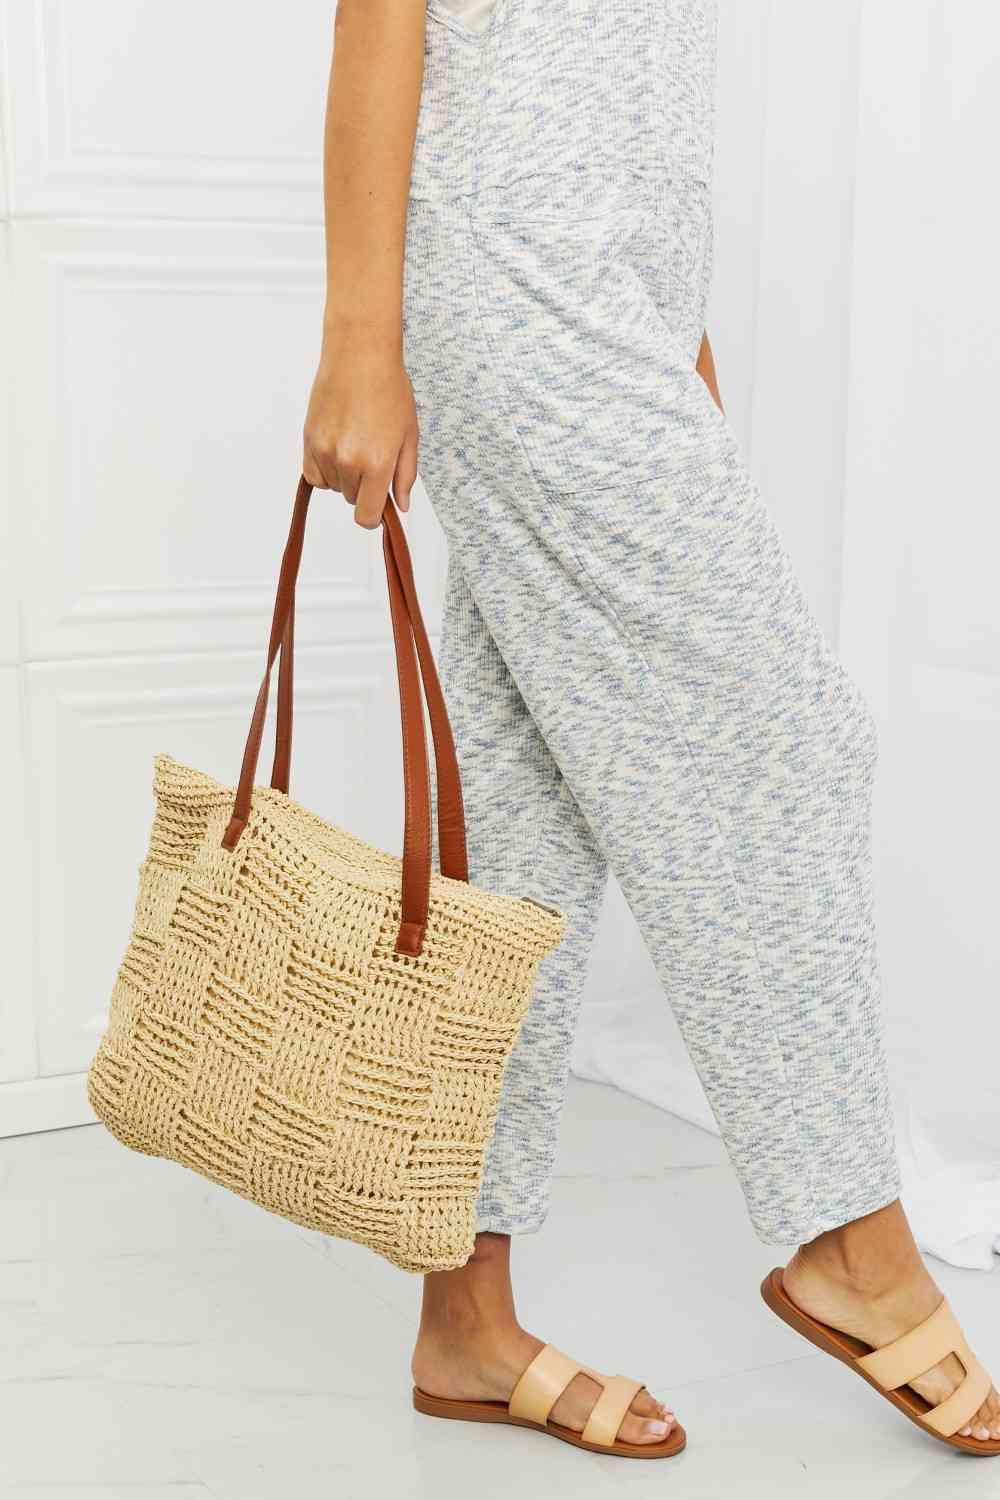 Fame Picnic Date Straw Tote Bag - Wildflower Hippies